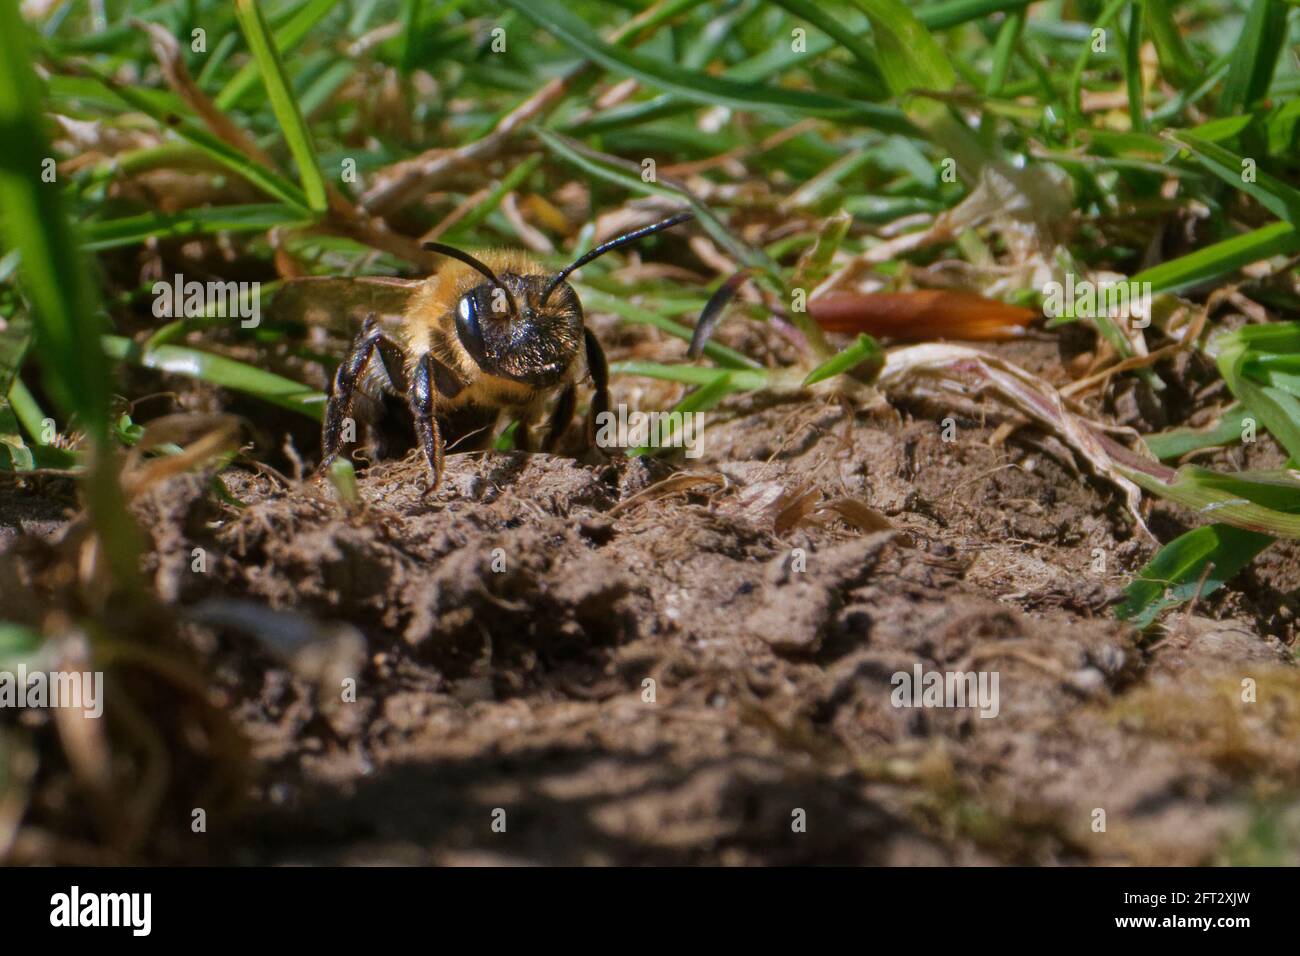 Chocolate mining bee (Andrena scotica) emerging from her nest burrow in a garden lawn after stocking brood cells with pollen, Wiltshire, UK, April. Stock Photo